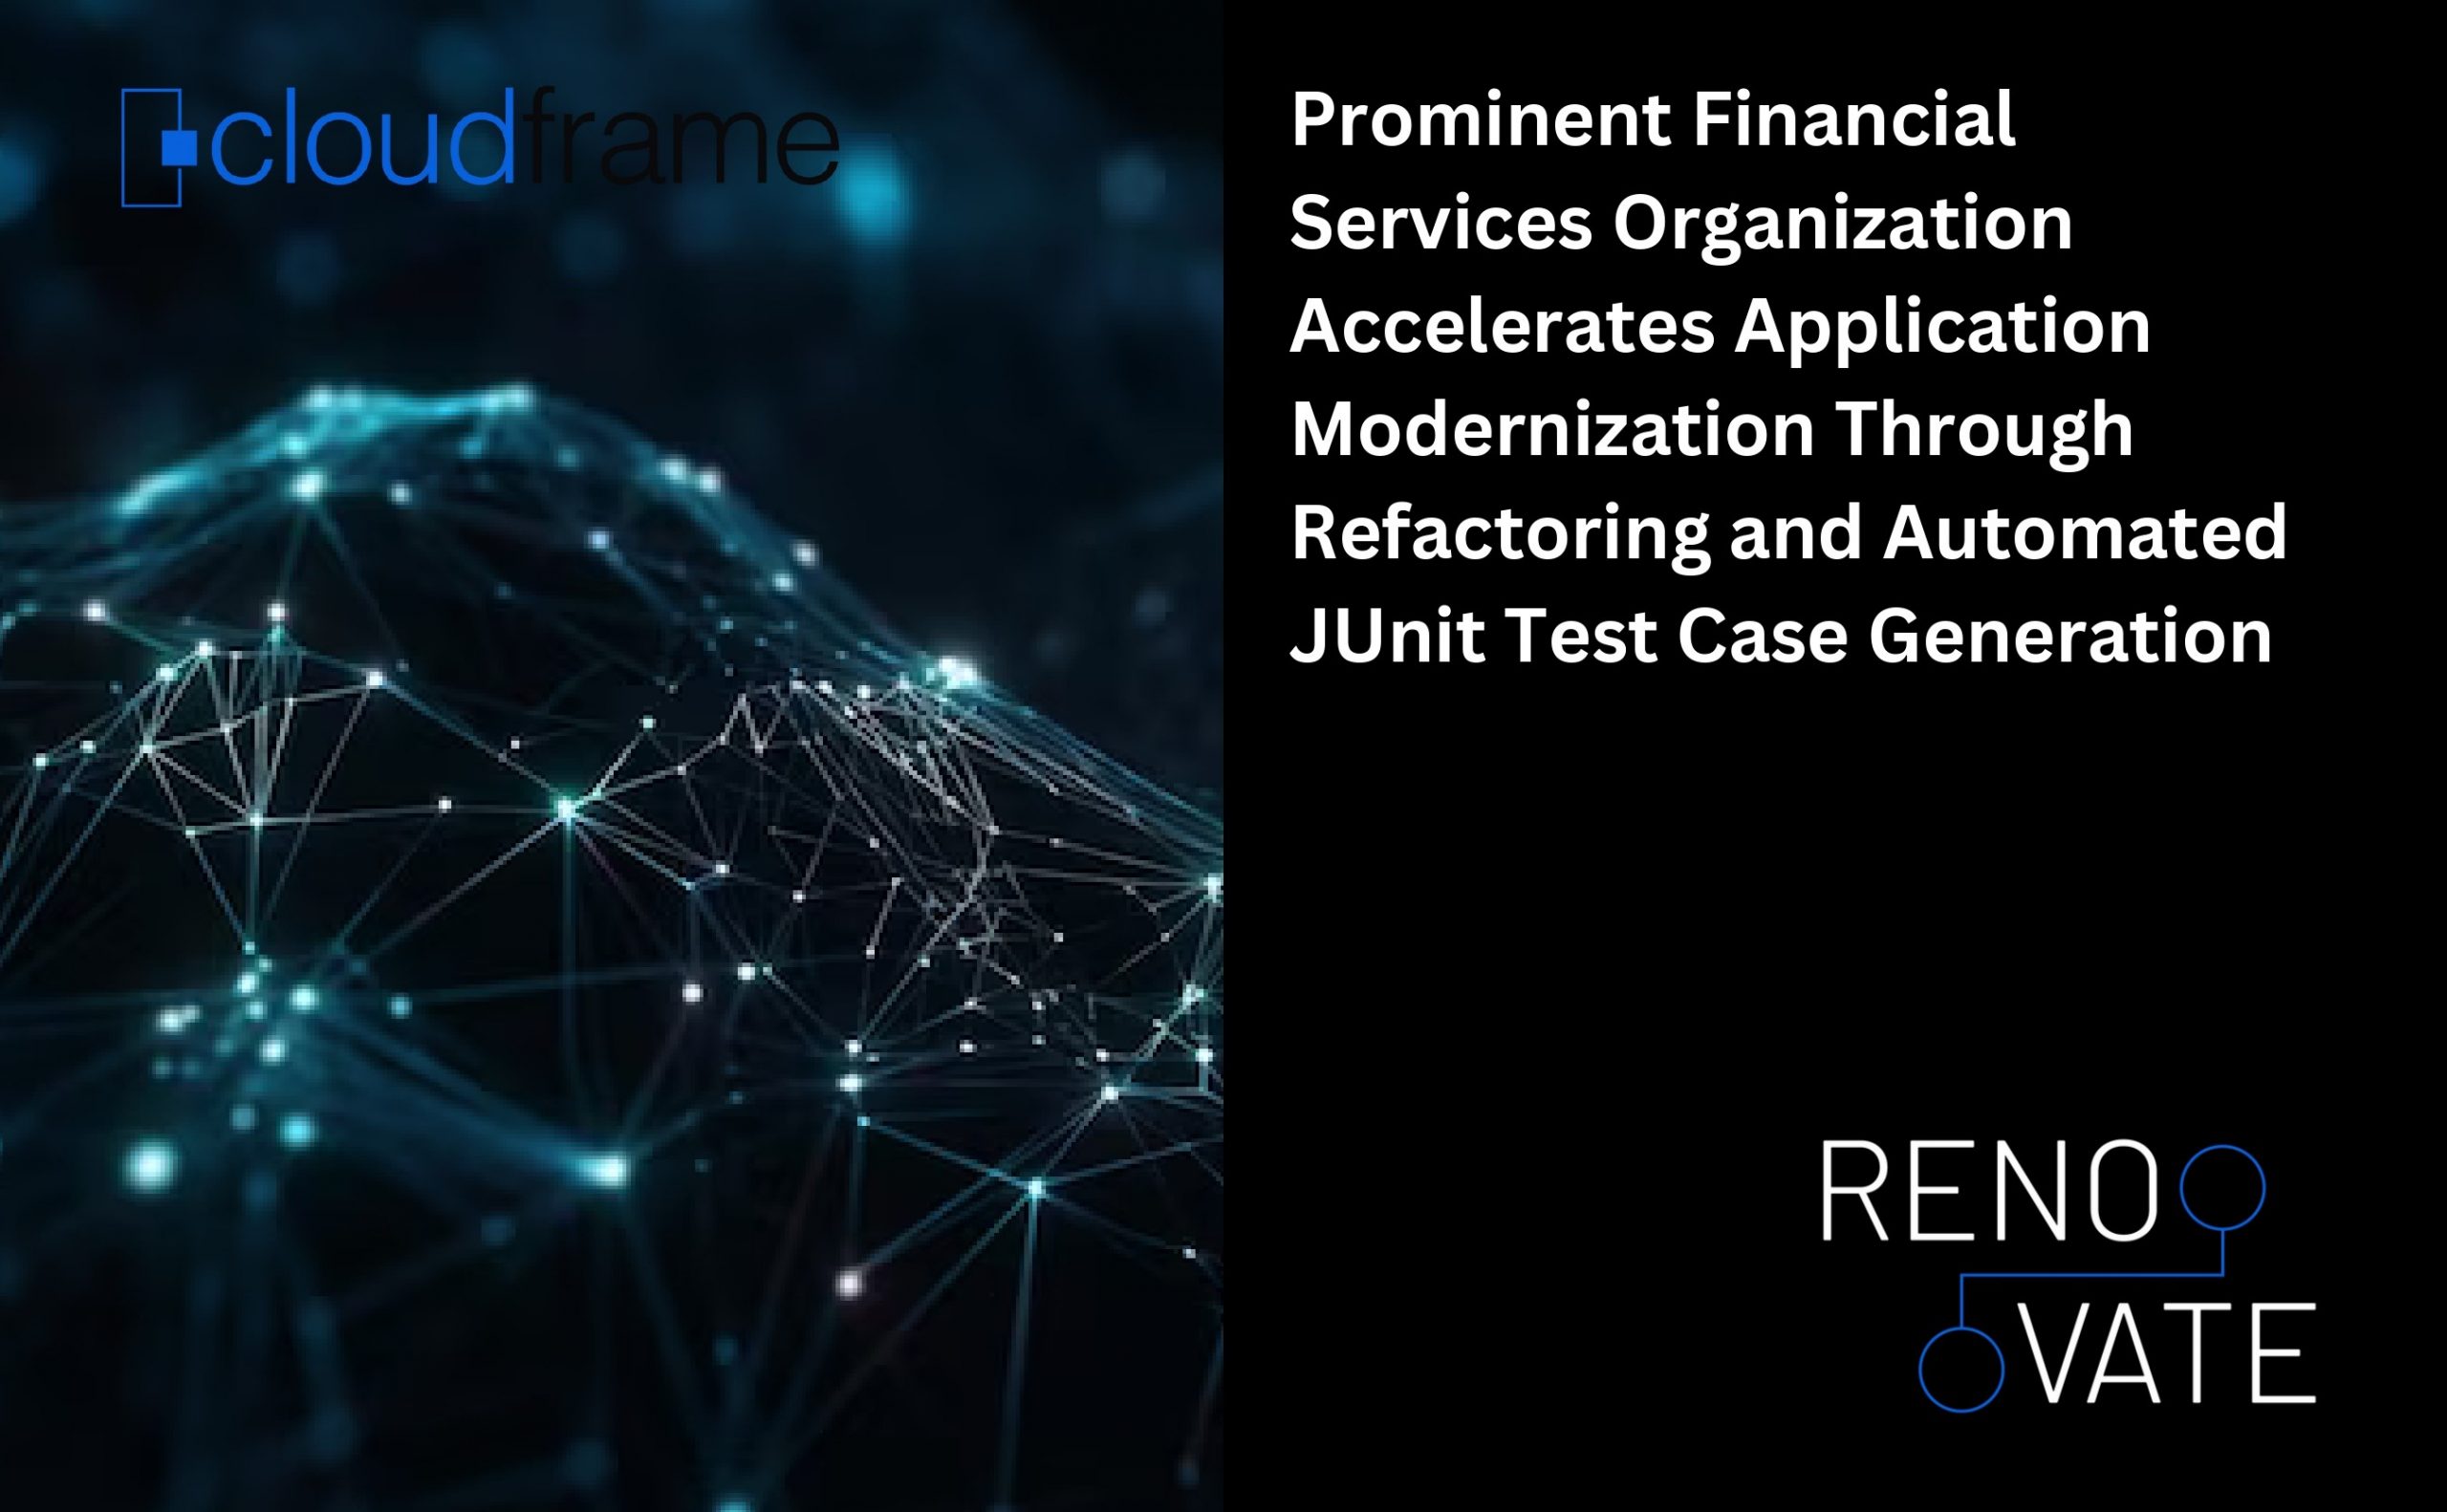 Financial Services Firm Accelerates Application Modernization by Automating JUnit Test Case Generation